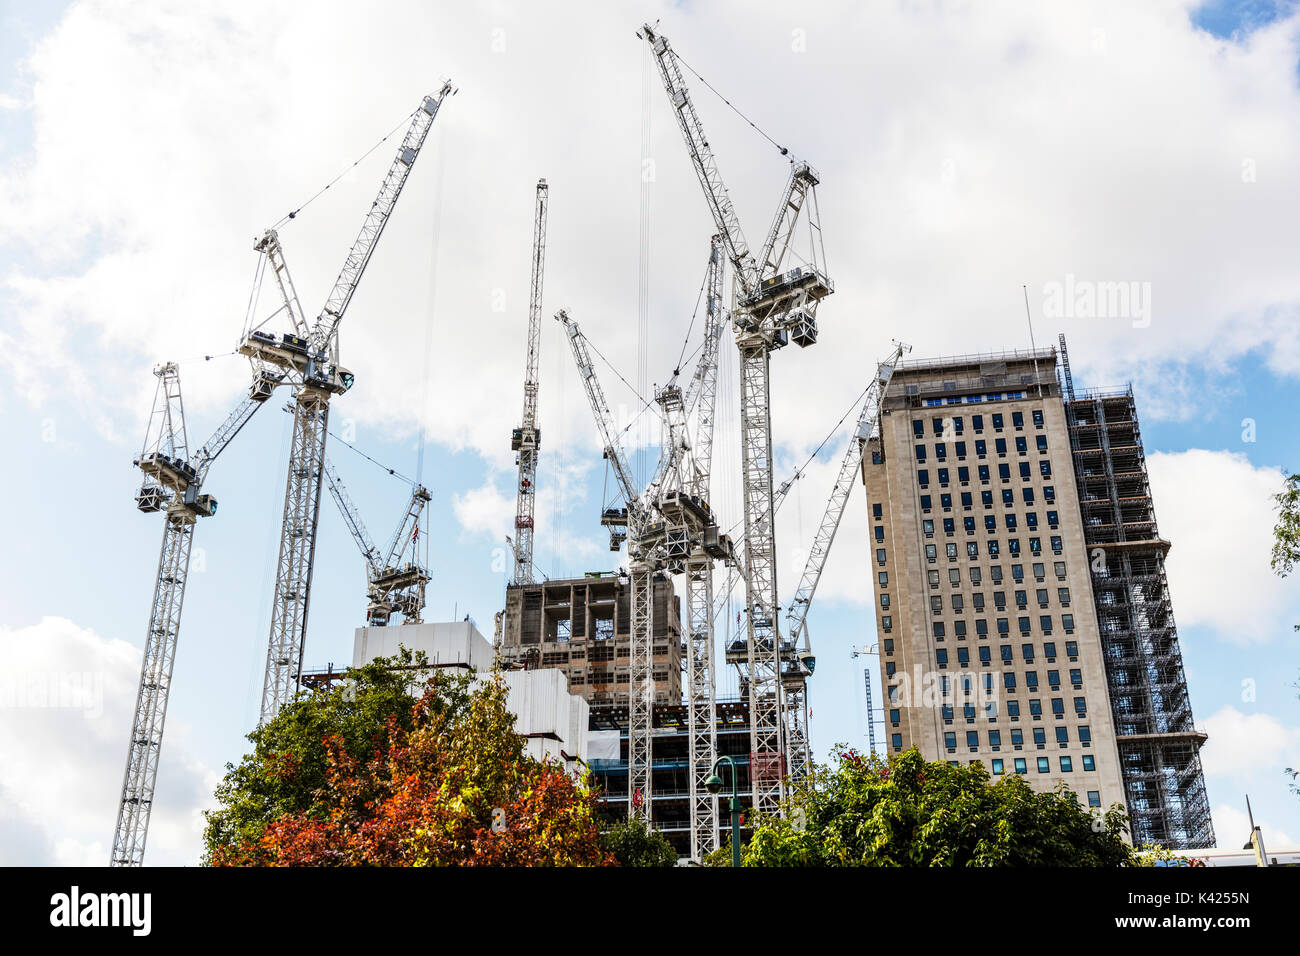 Tower cranes, building work, construction, cranes, tower crane, London construction, Construction UK, London flats, working at heights, London, UK, Stock Photo